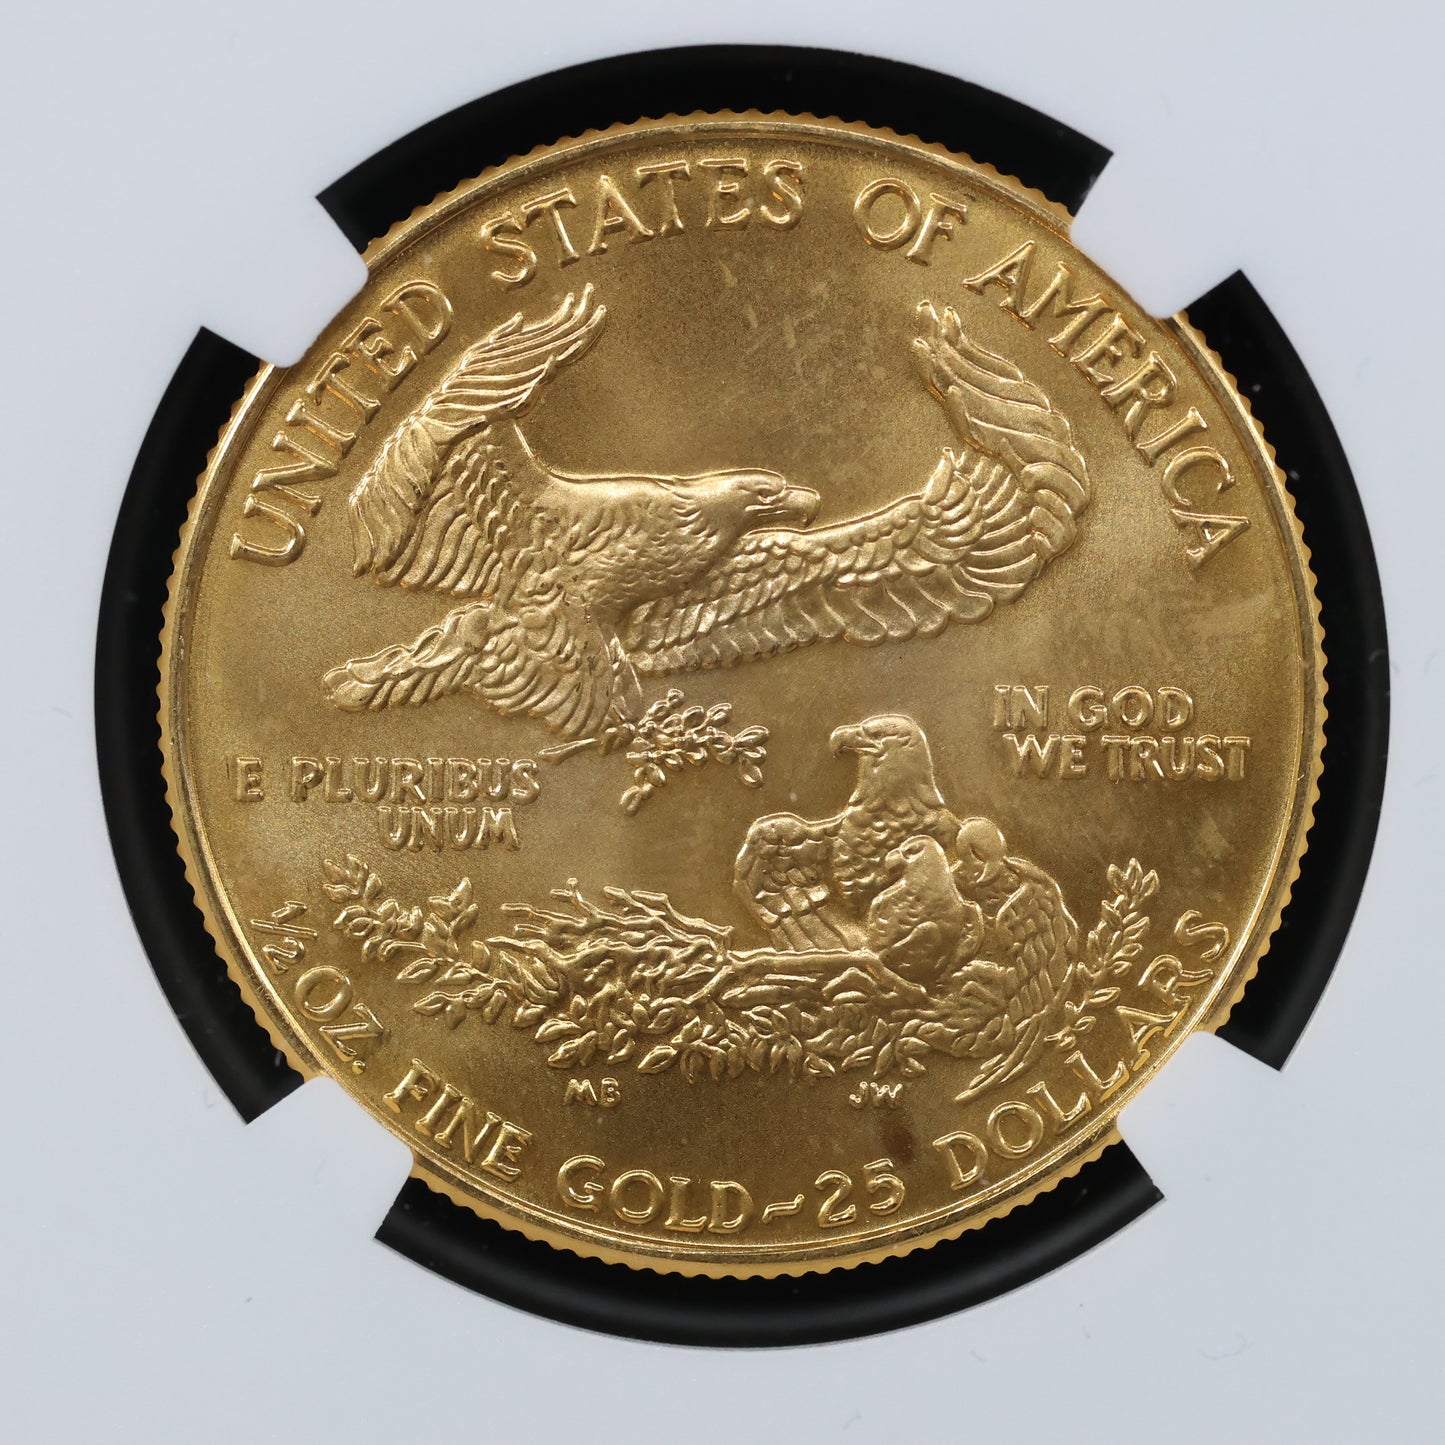 1987 1/2 oz Gold American Eagle 25$ Bullion Gold Coin - NGC MS 69